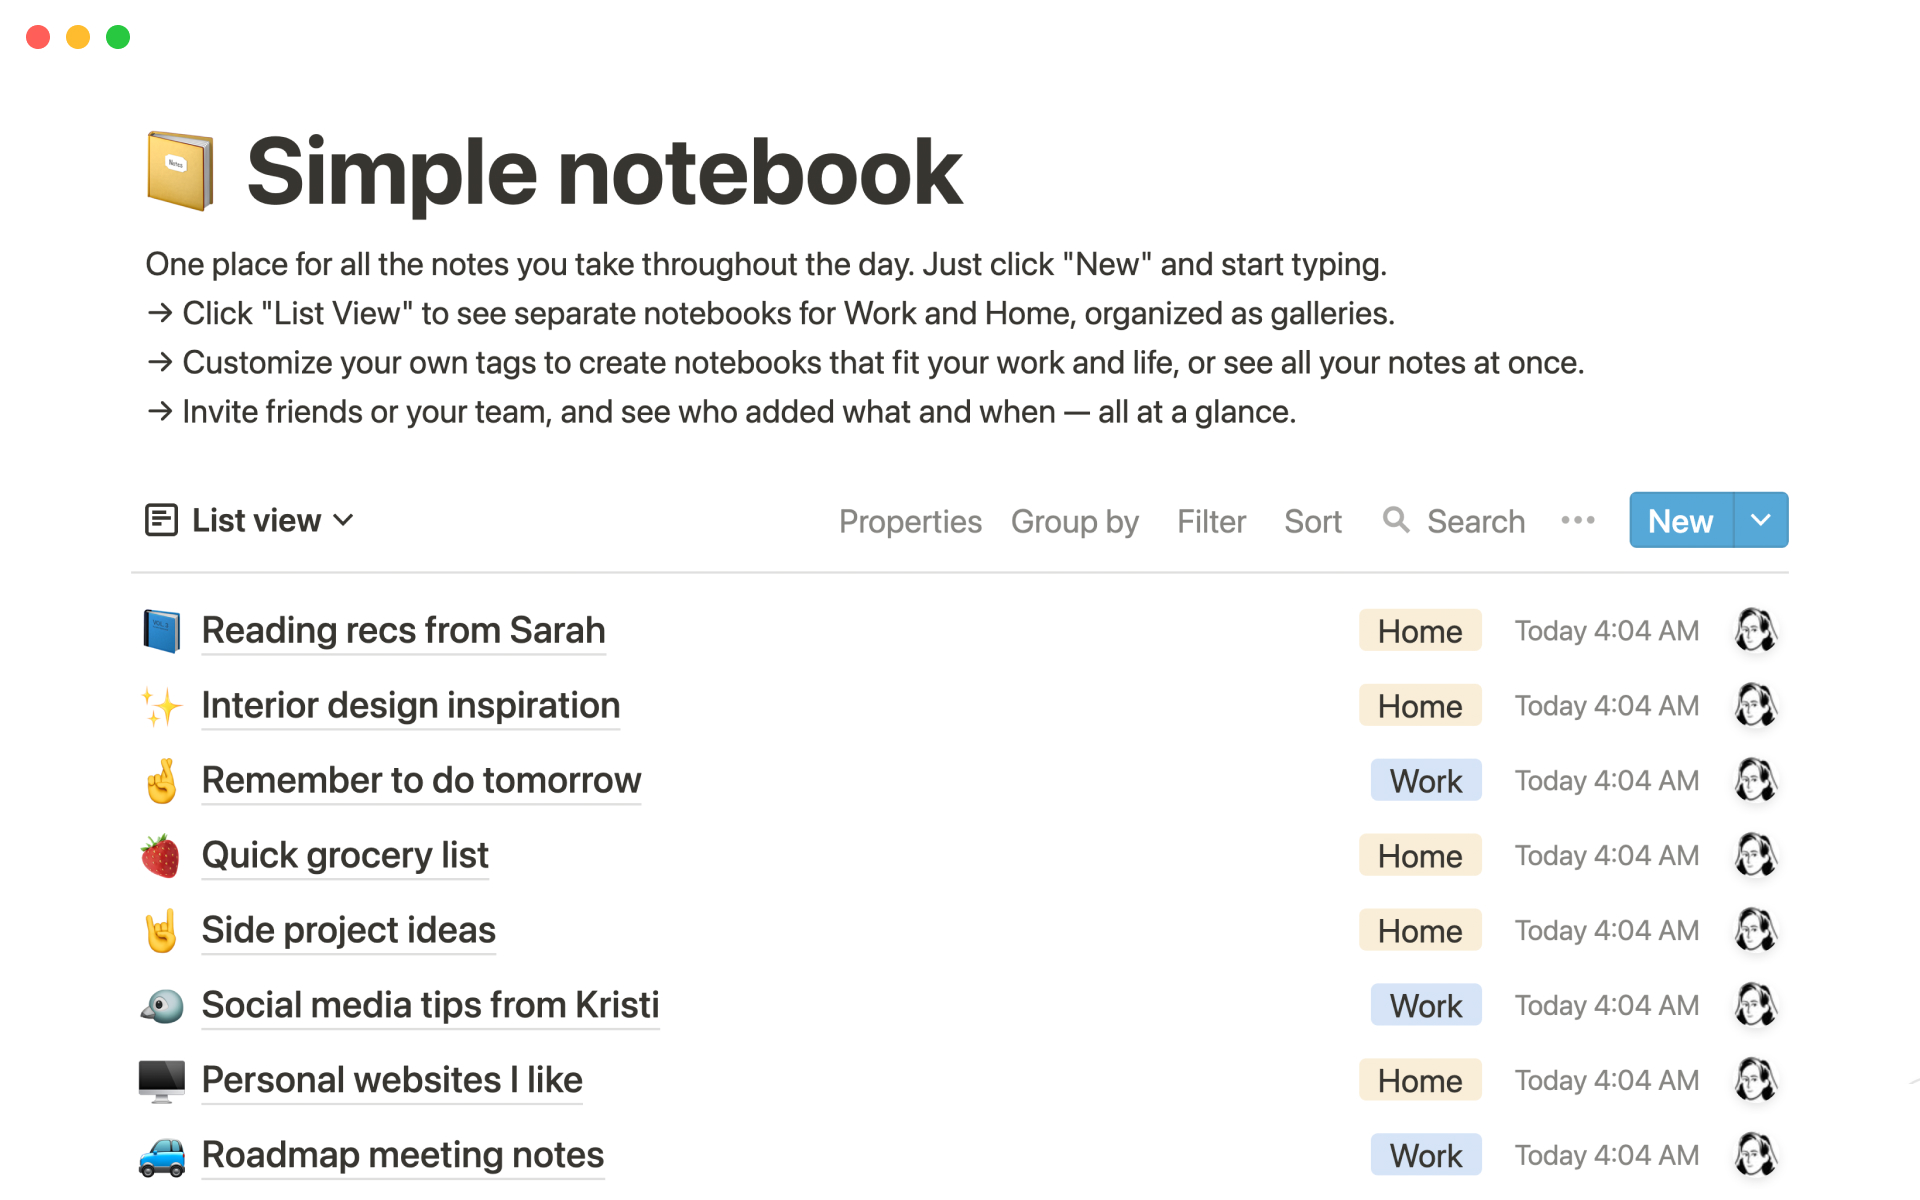 The desktop image for the Simple notebook template